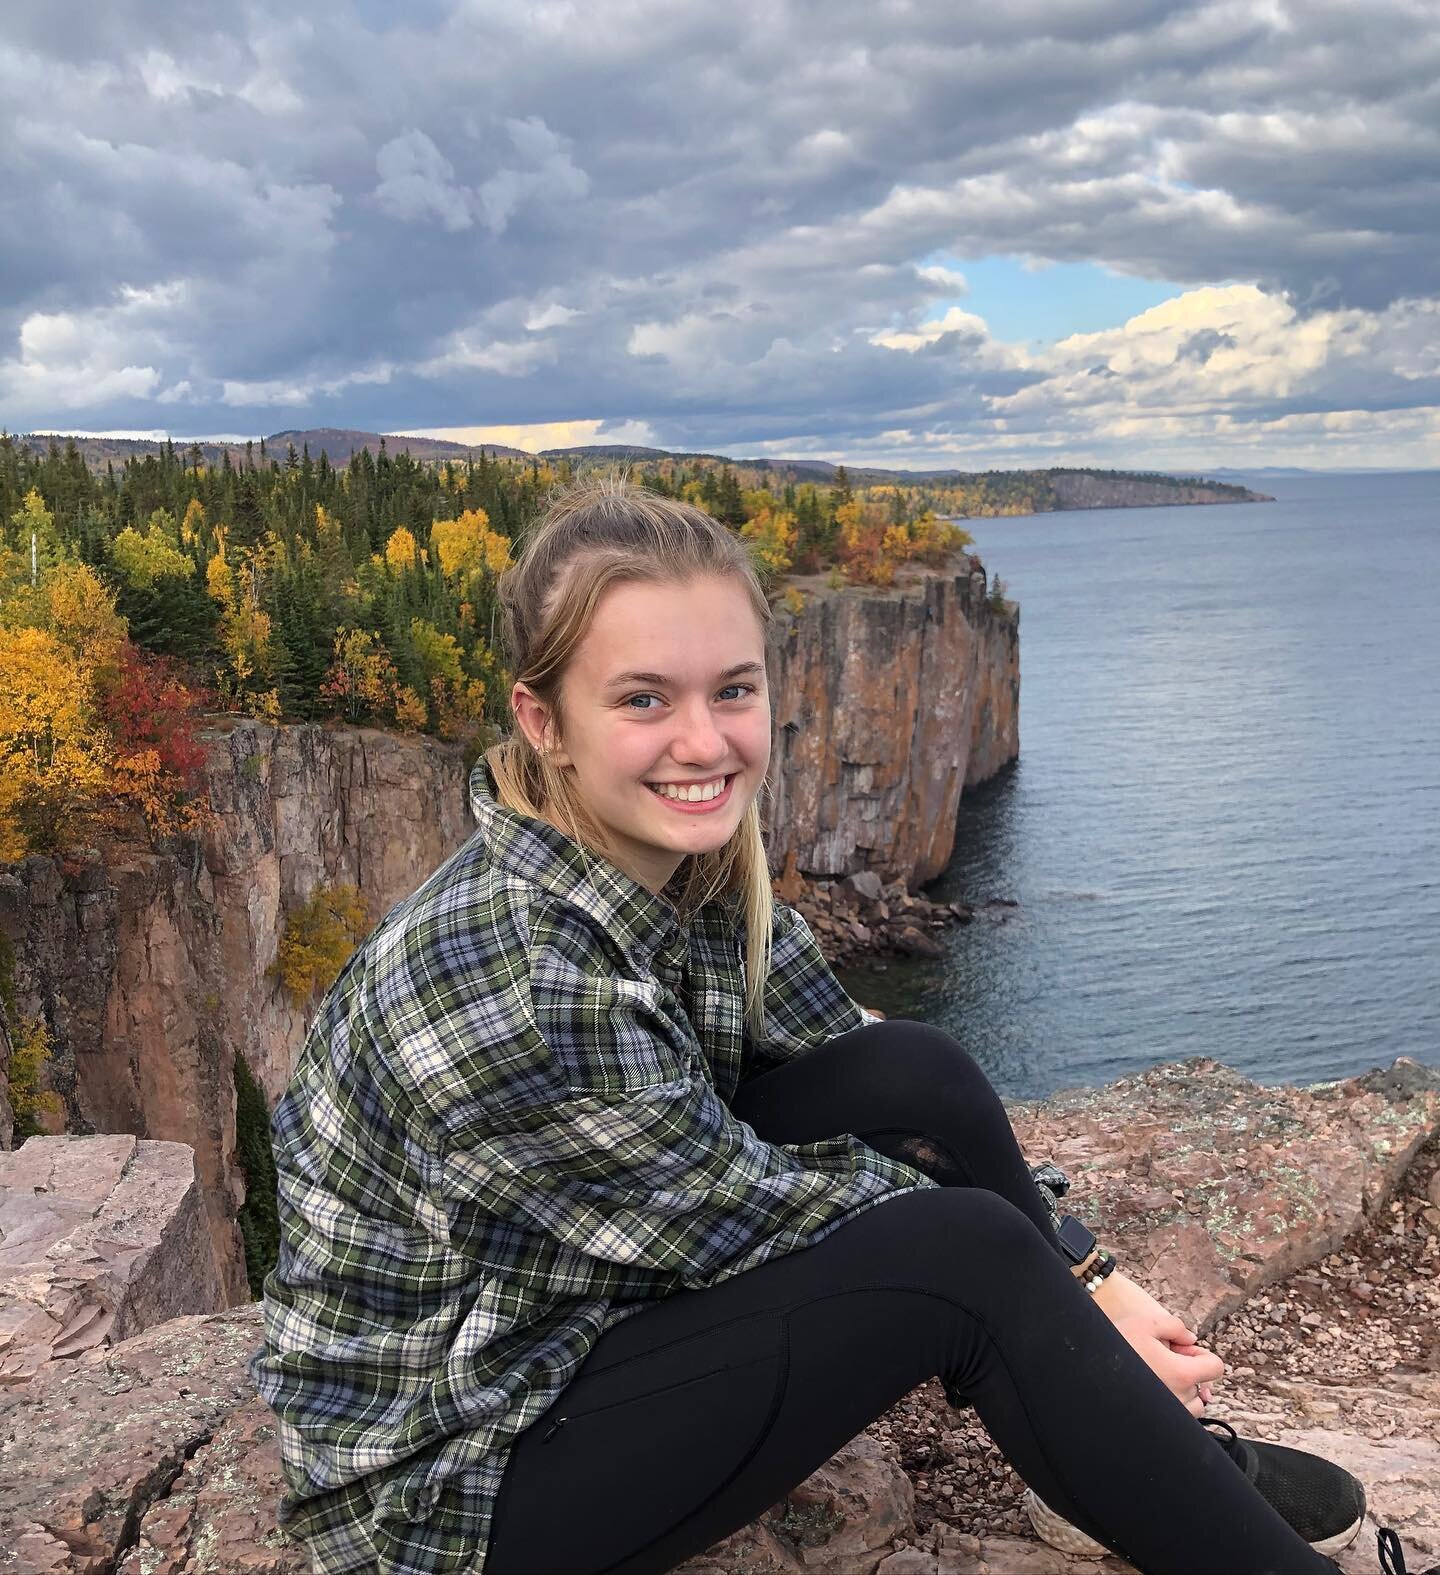 Meet our senior spotlight, Nicole Thompson!

&ldquo;As a senior studying Sustainable Systems Management in CFANS, finding my way into the business world was tough. Akpsi has helped me make real business connections and build a network to help advance